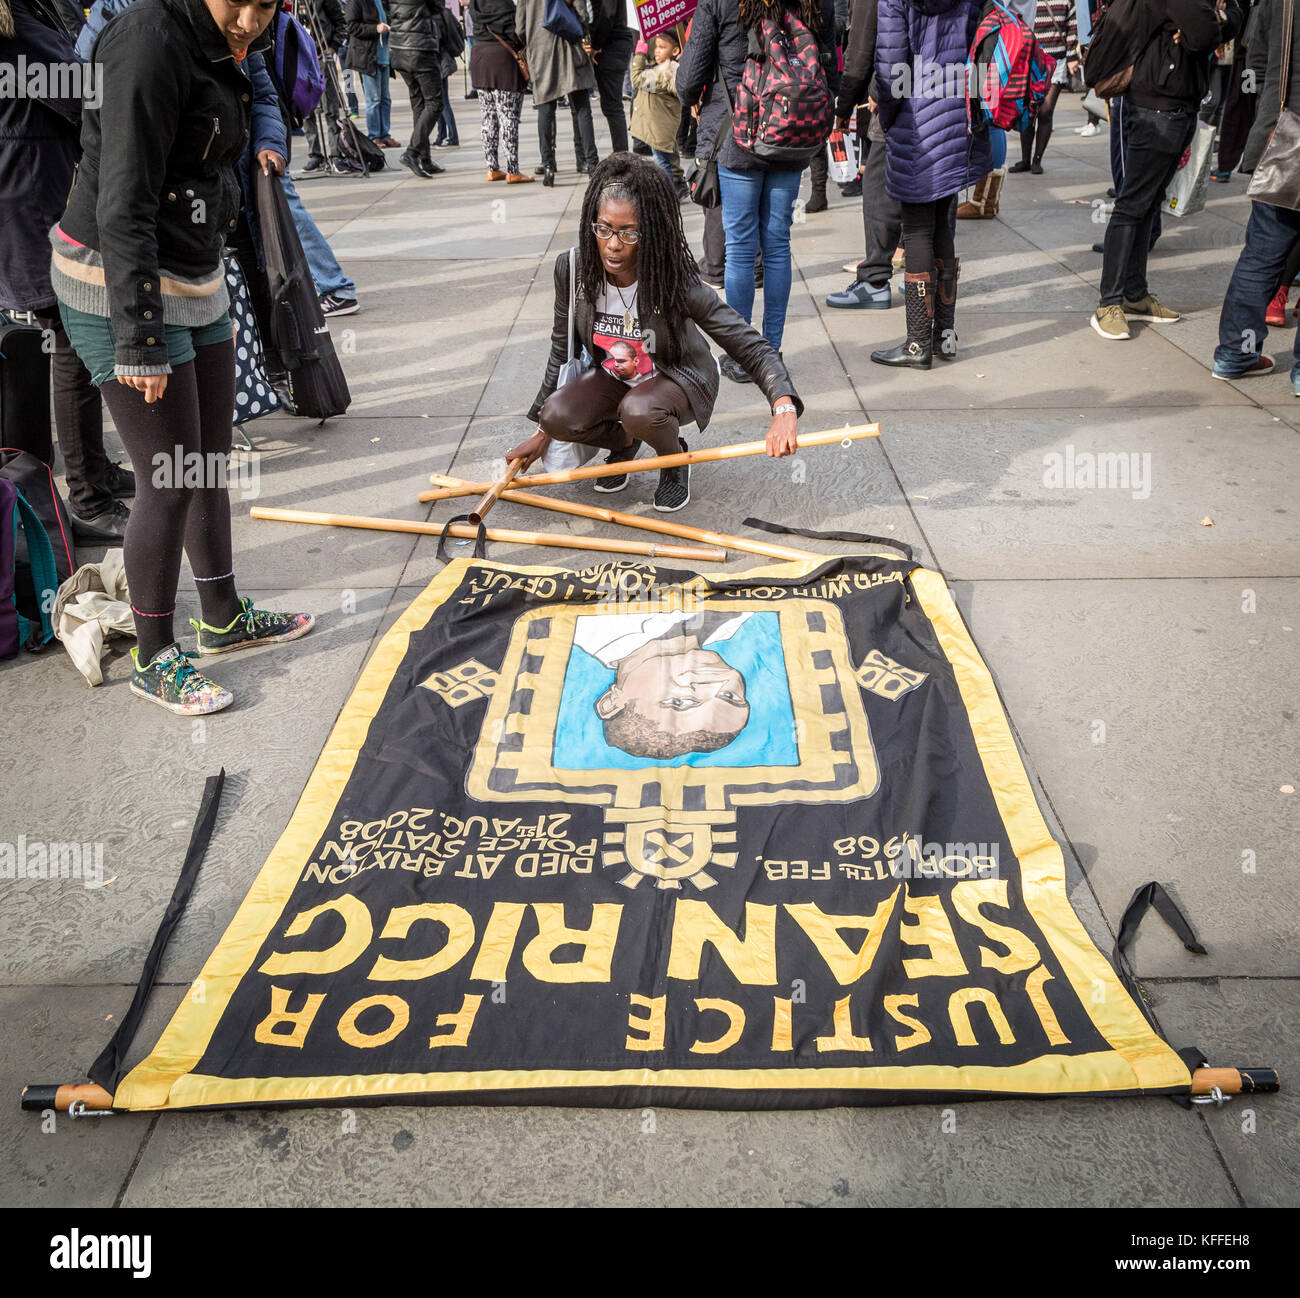 London, UK. 28th Oct, 2017. 19th Annual remembrance procession protest march by United Families and Friends Campaign (UFFC), a coalition of family and those affected by deaths in police, prison, immigration and psychiatric custody. Credit: Guy Corbishley/Alamy Live News Stock Photo